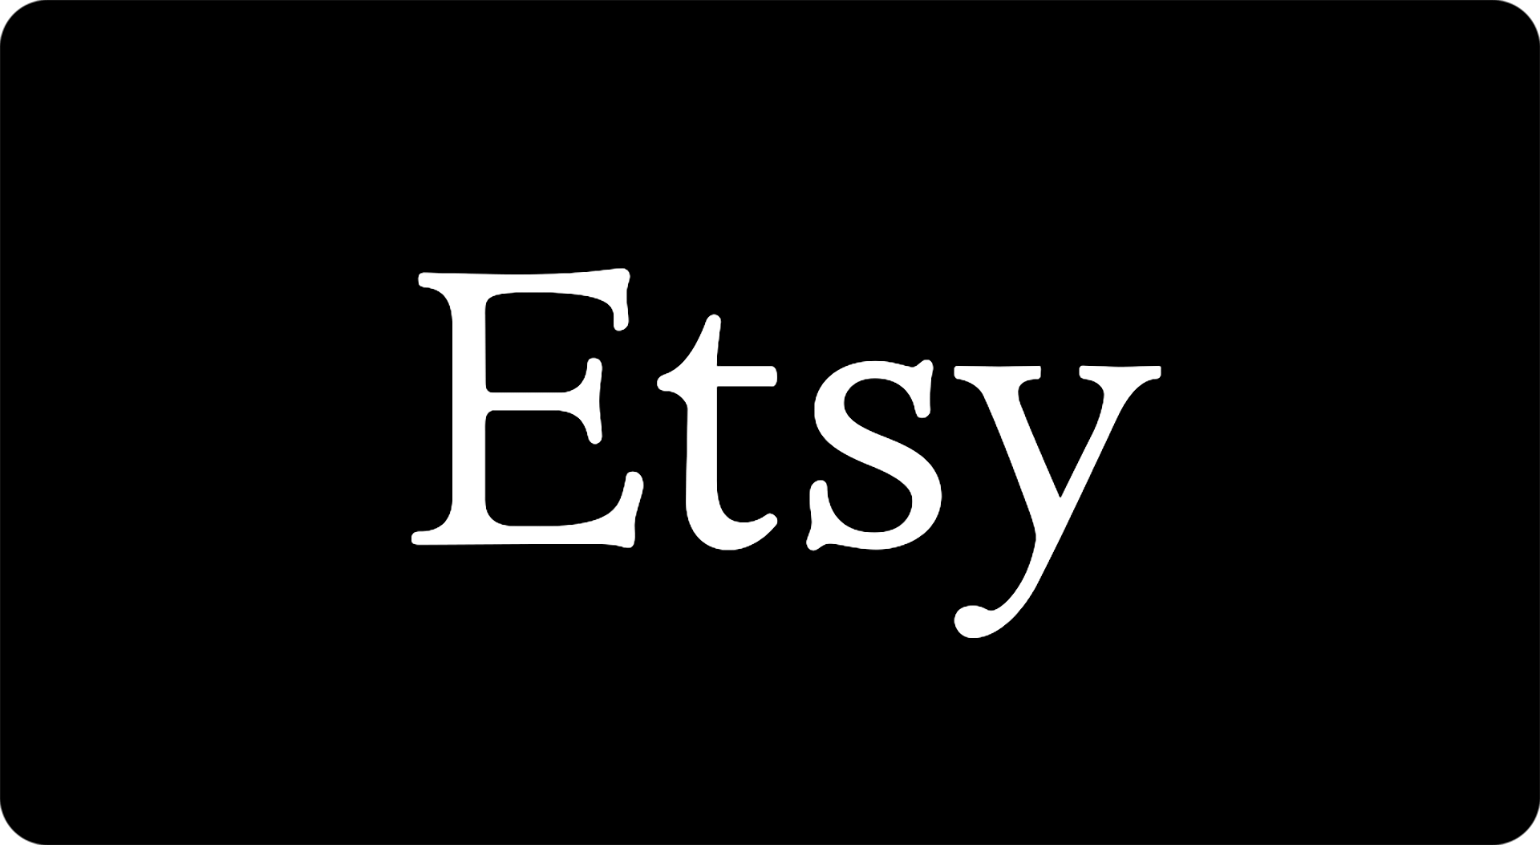 This picture is a black box with Etsy written in white text in the center. Photo credit: Etsy website